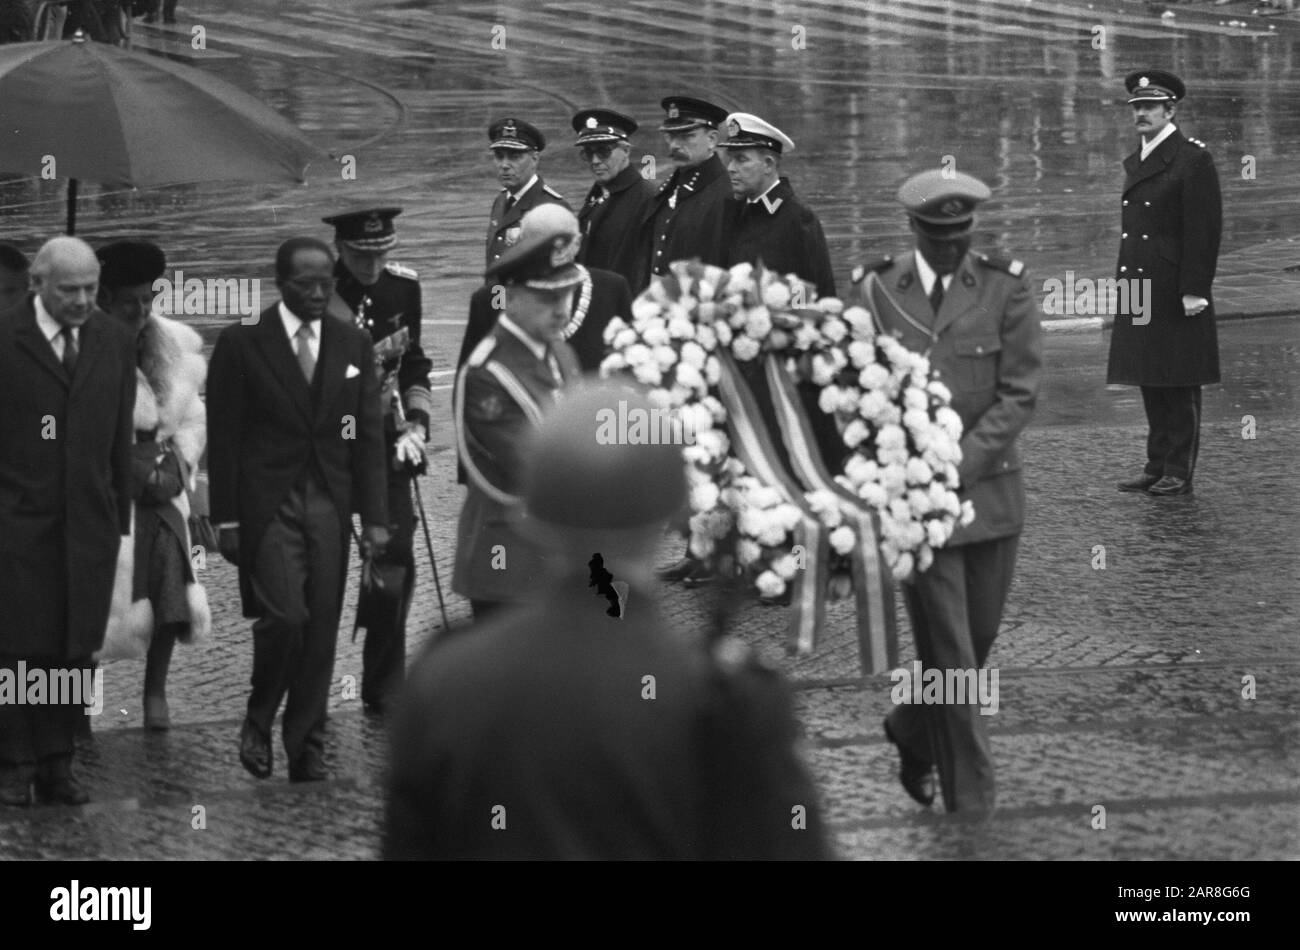 State visit President Senghor of Senegal to the Netherlands wreath laying by Senghor at National Monument Date: October 22, 1974 Location: Amsterdam, Noord-Holland Keywords: wreaths, presidents, state visits Stock Photo